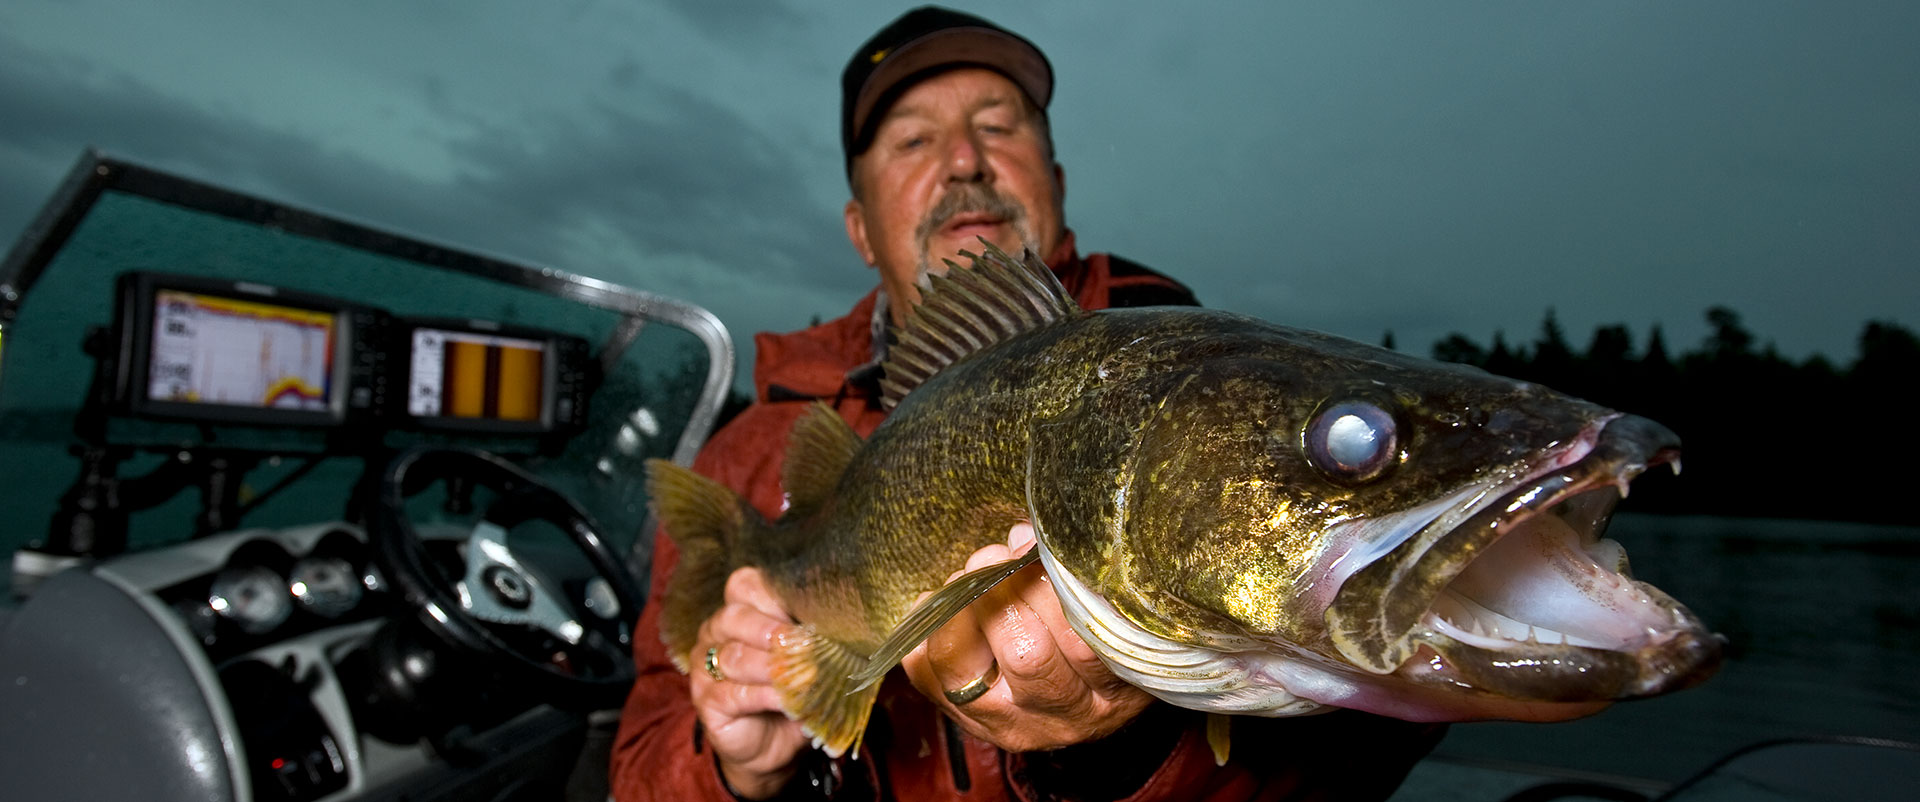 Guided Fishing Trips - Minnesota Fishing Connections - Tom Neustrom - Grand  Rapids MN and Deer River MN